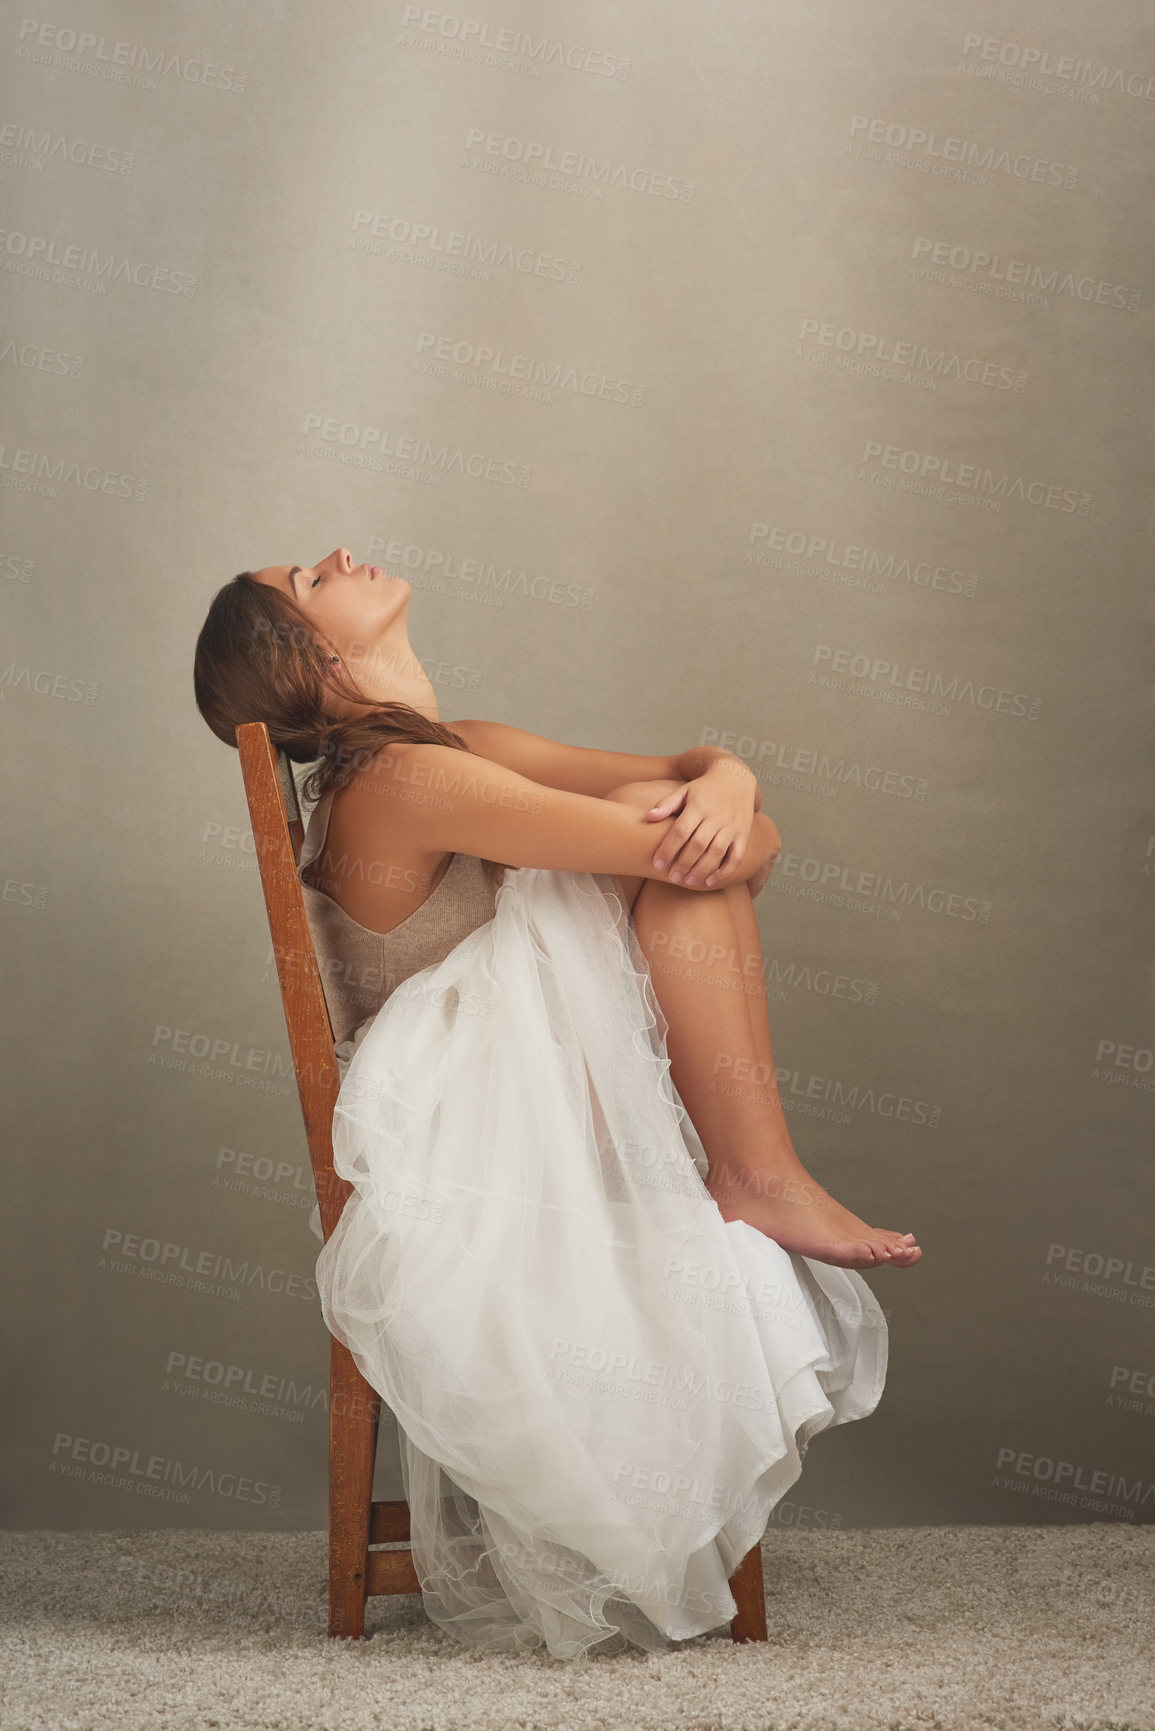 Buy stock photo Studio shot of an attractive young woman looking depressed while sitting on a chair